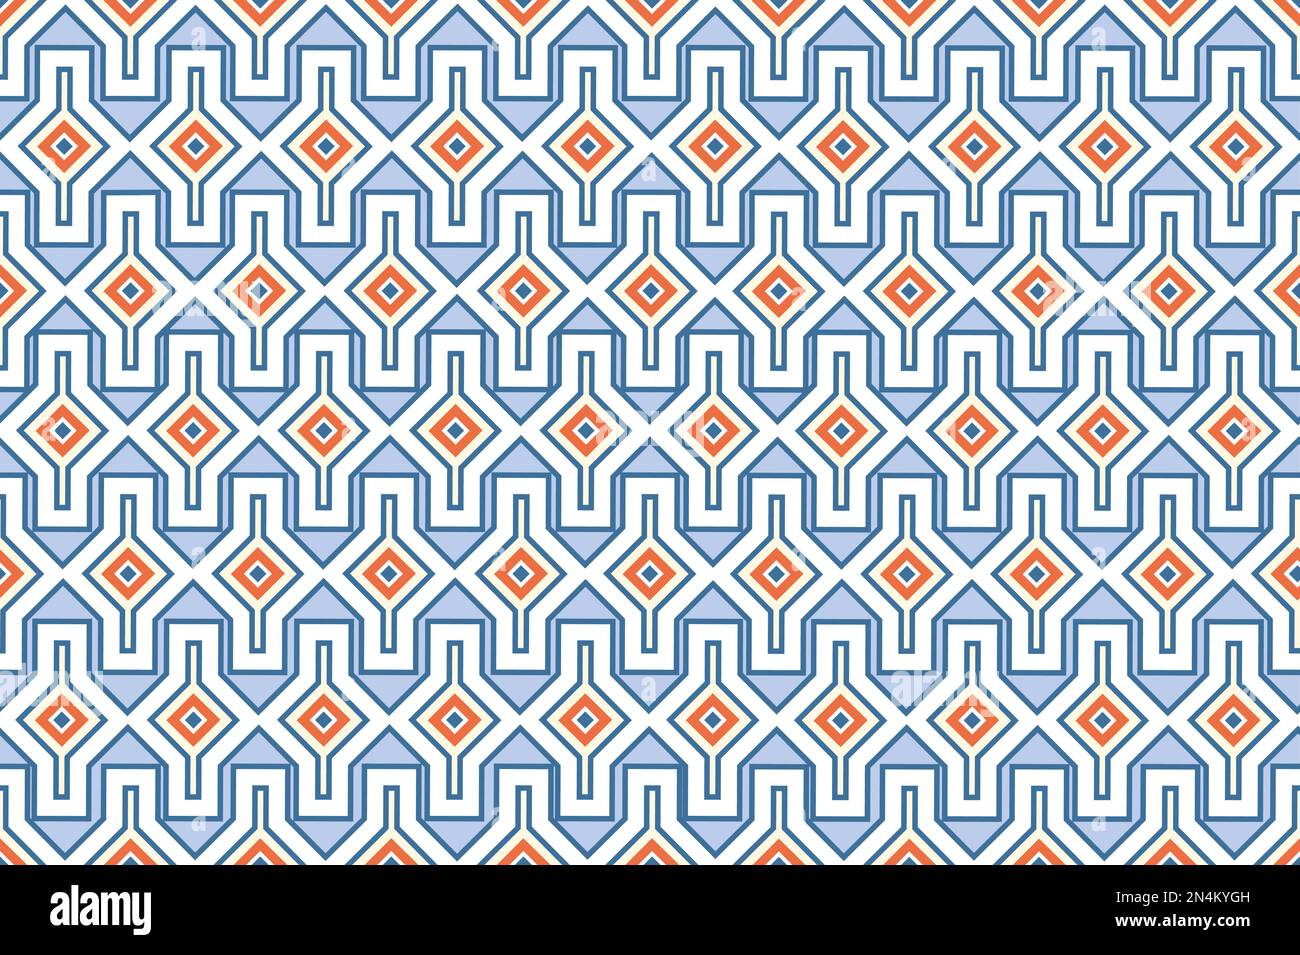 Abstract geometric shape seamless pattern. Mosaic design tile background. Geometric line ornament with stylish asian decor motif Stock Vector